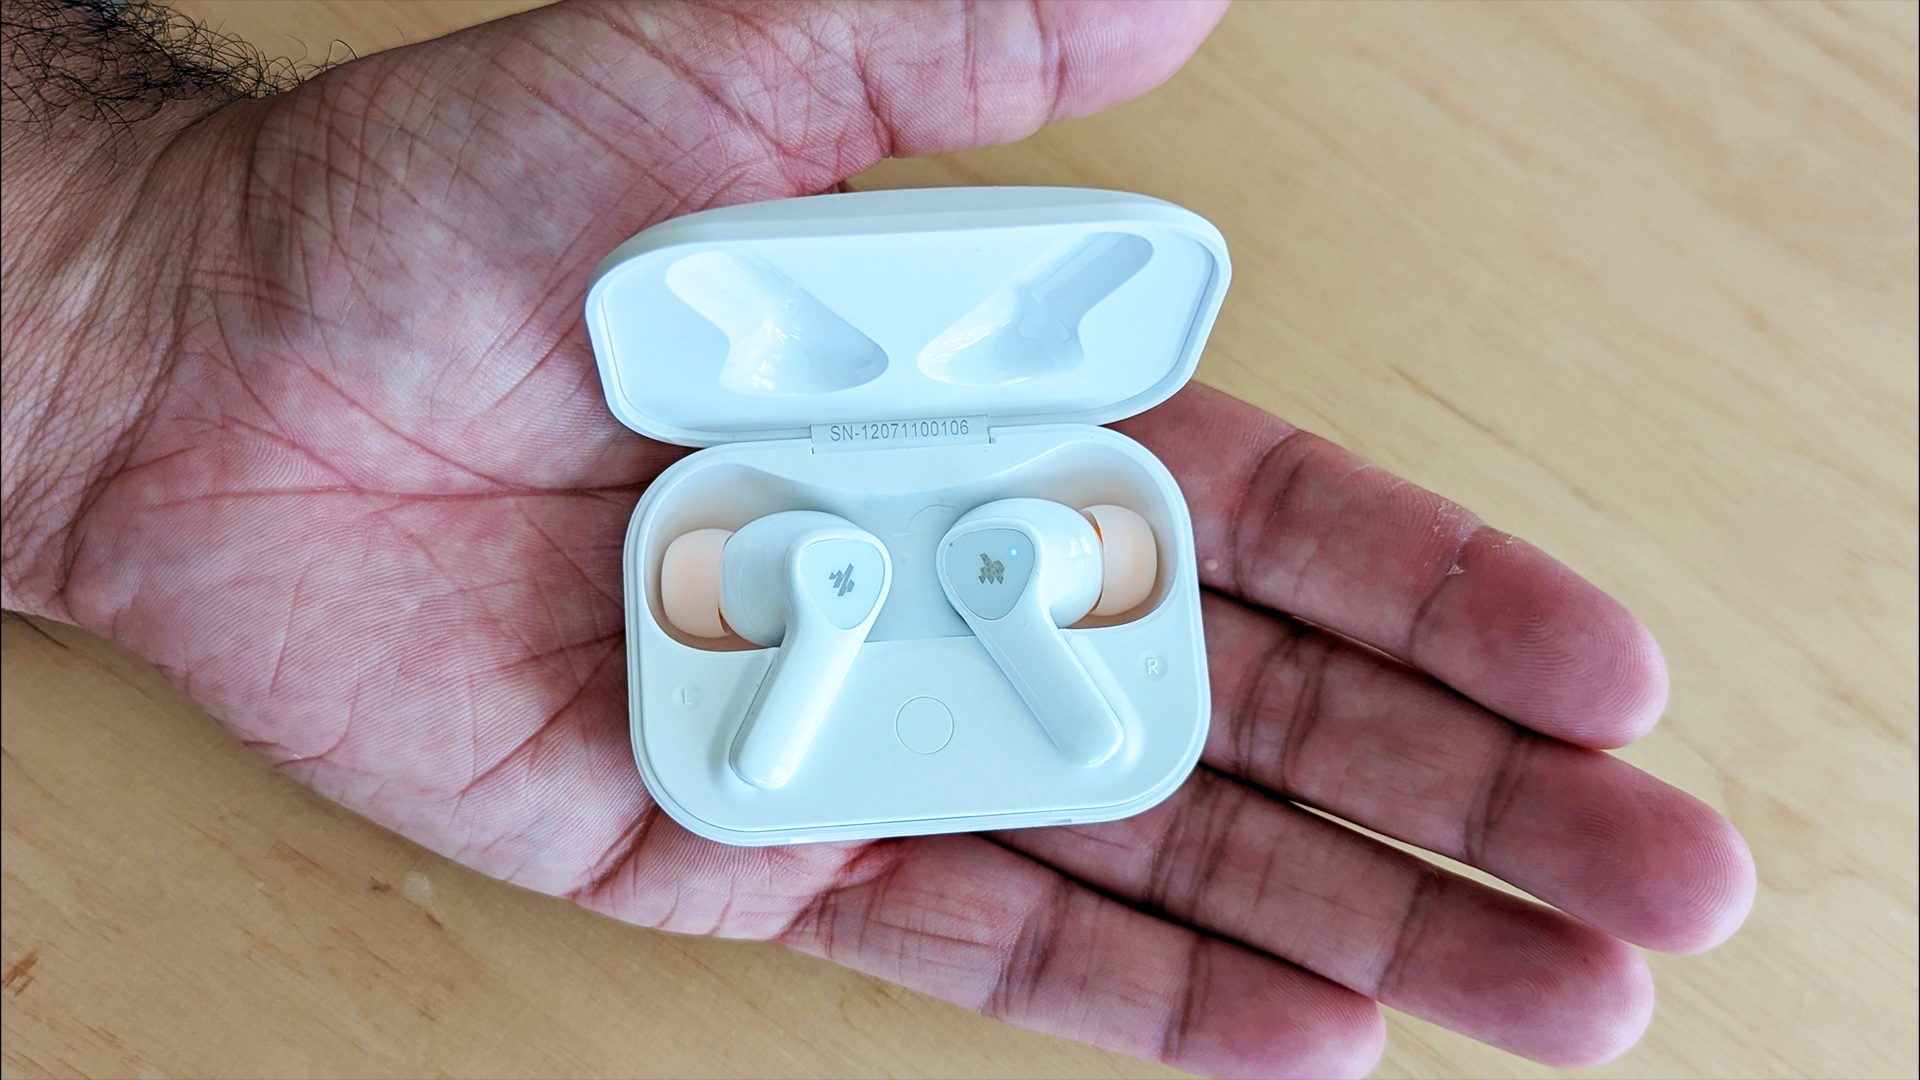 The Donner DoBuds One wireless earbuds in reviewer's hand.